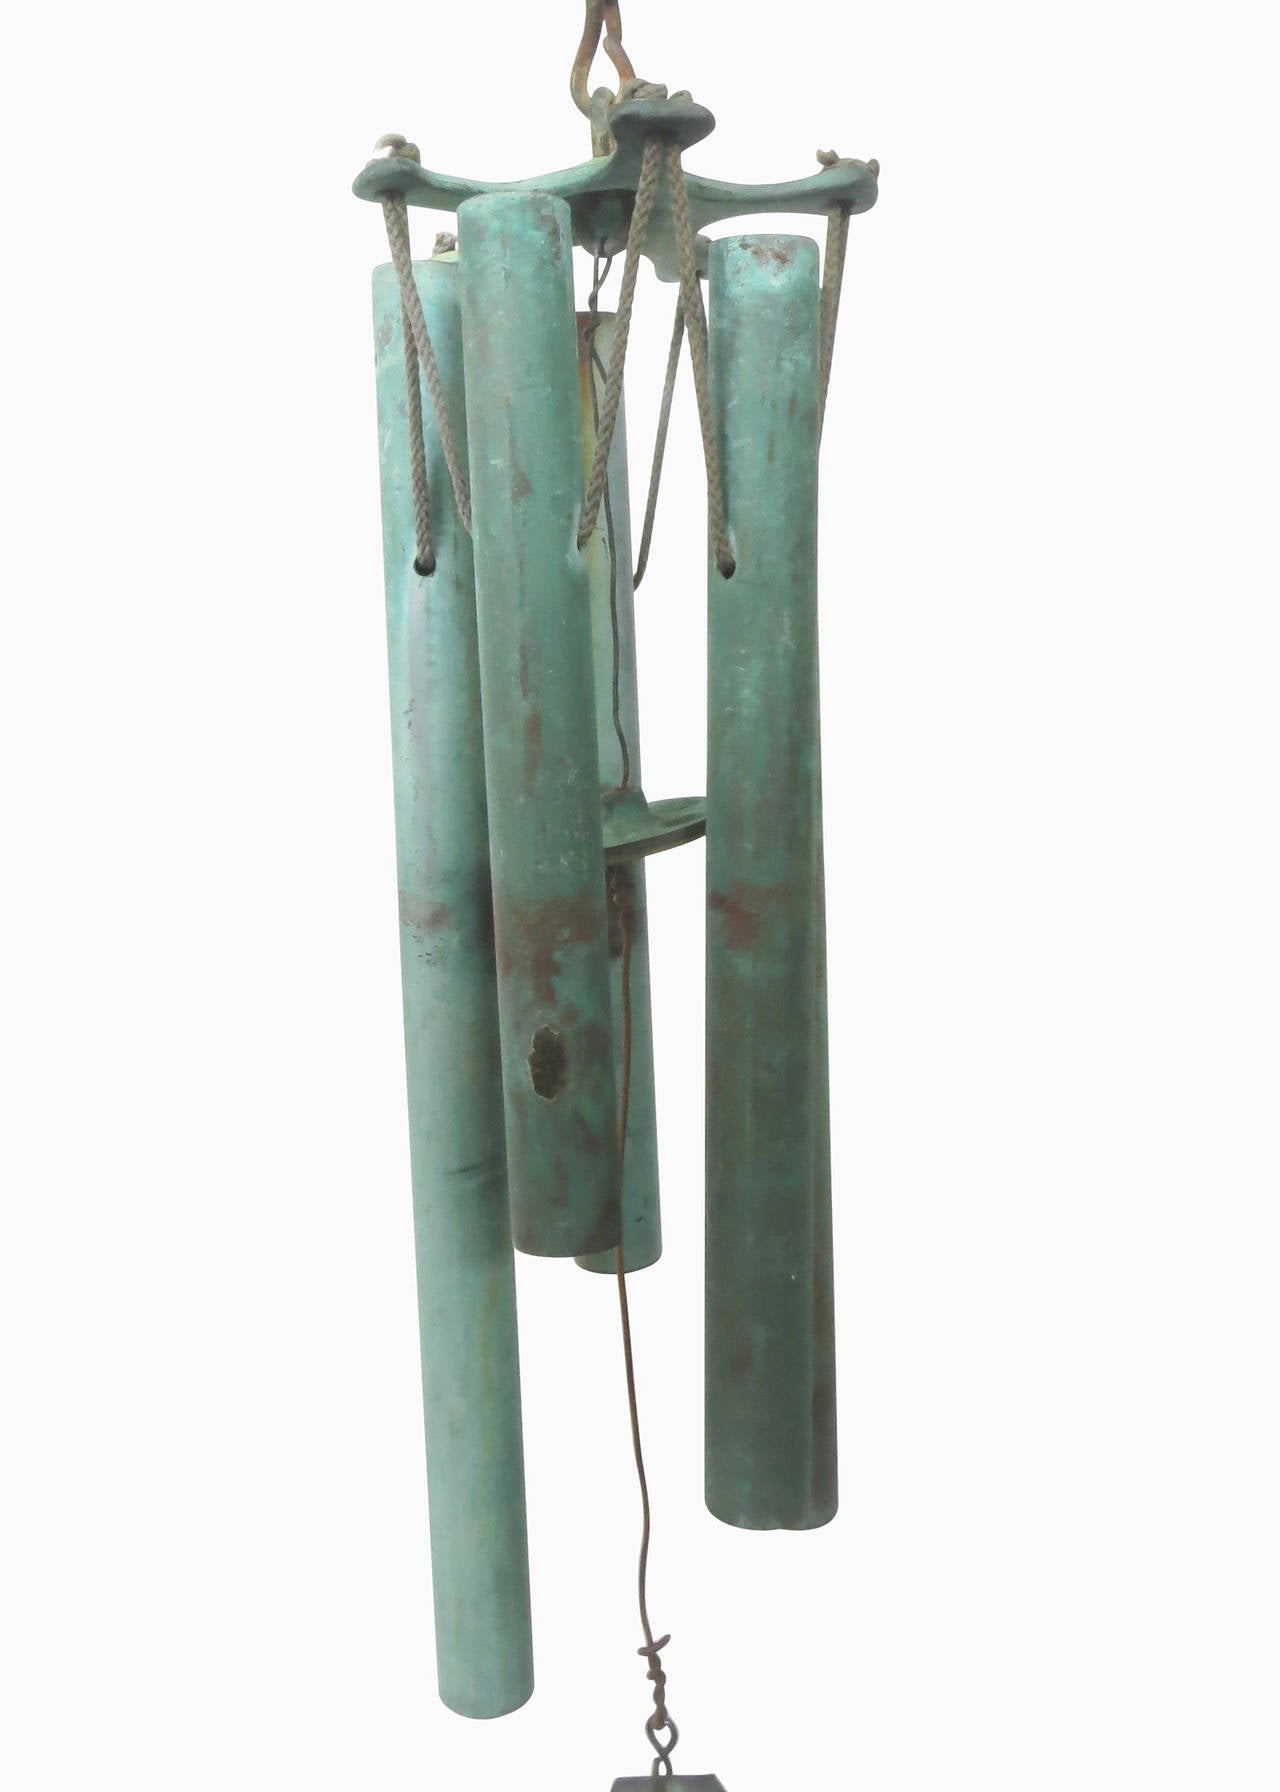 Bronze Modernist Wind Chimes by Walter Lamb 1